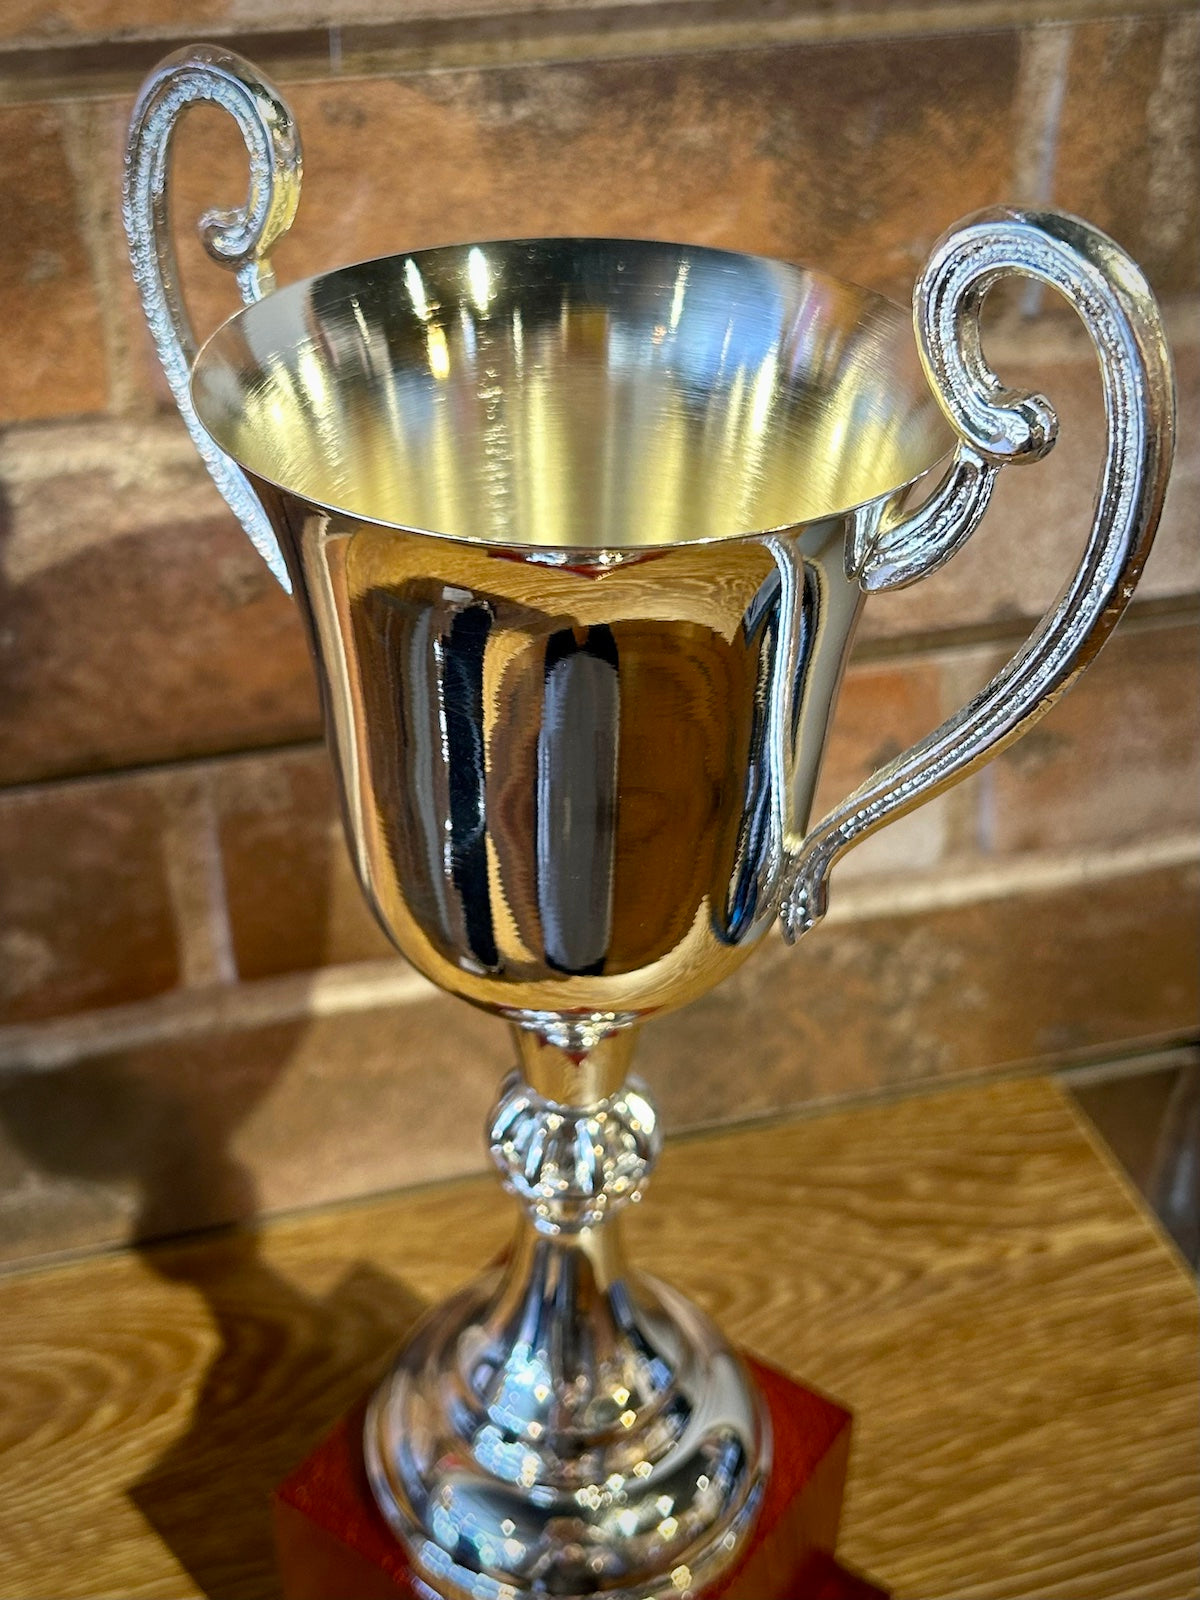 Premium Handmade in Italy Silver Trophy Cup